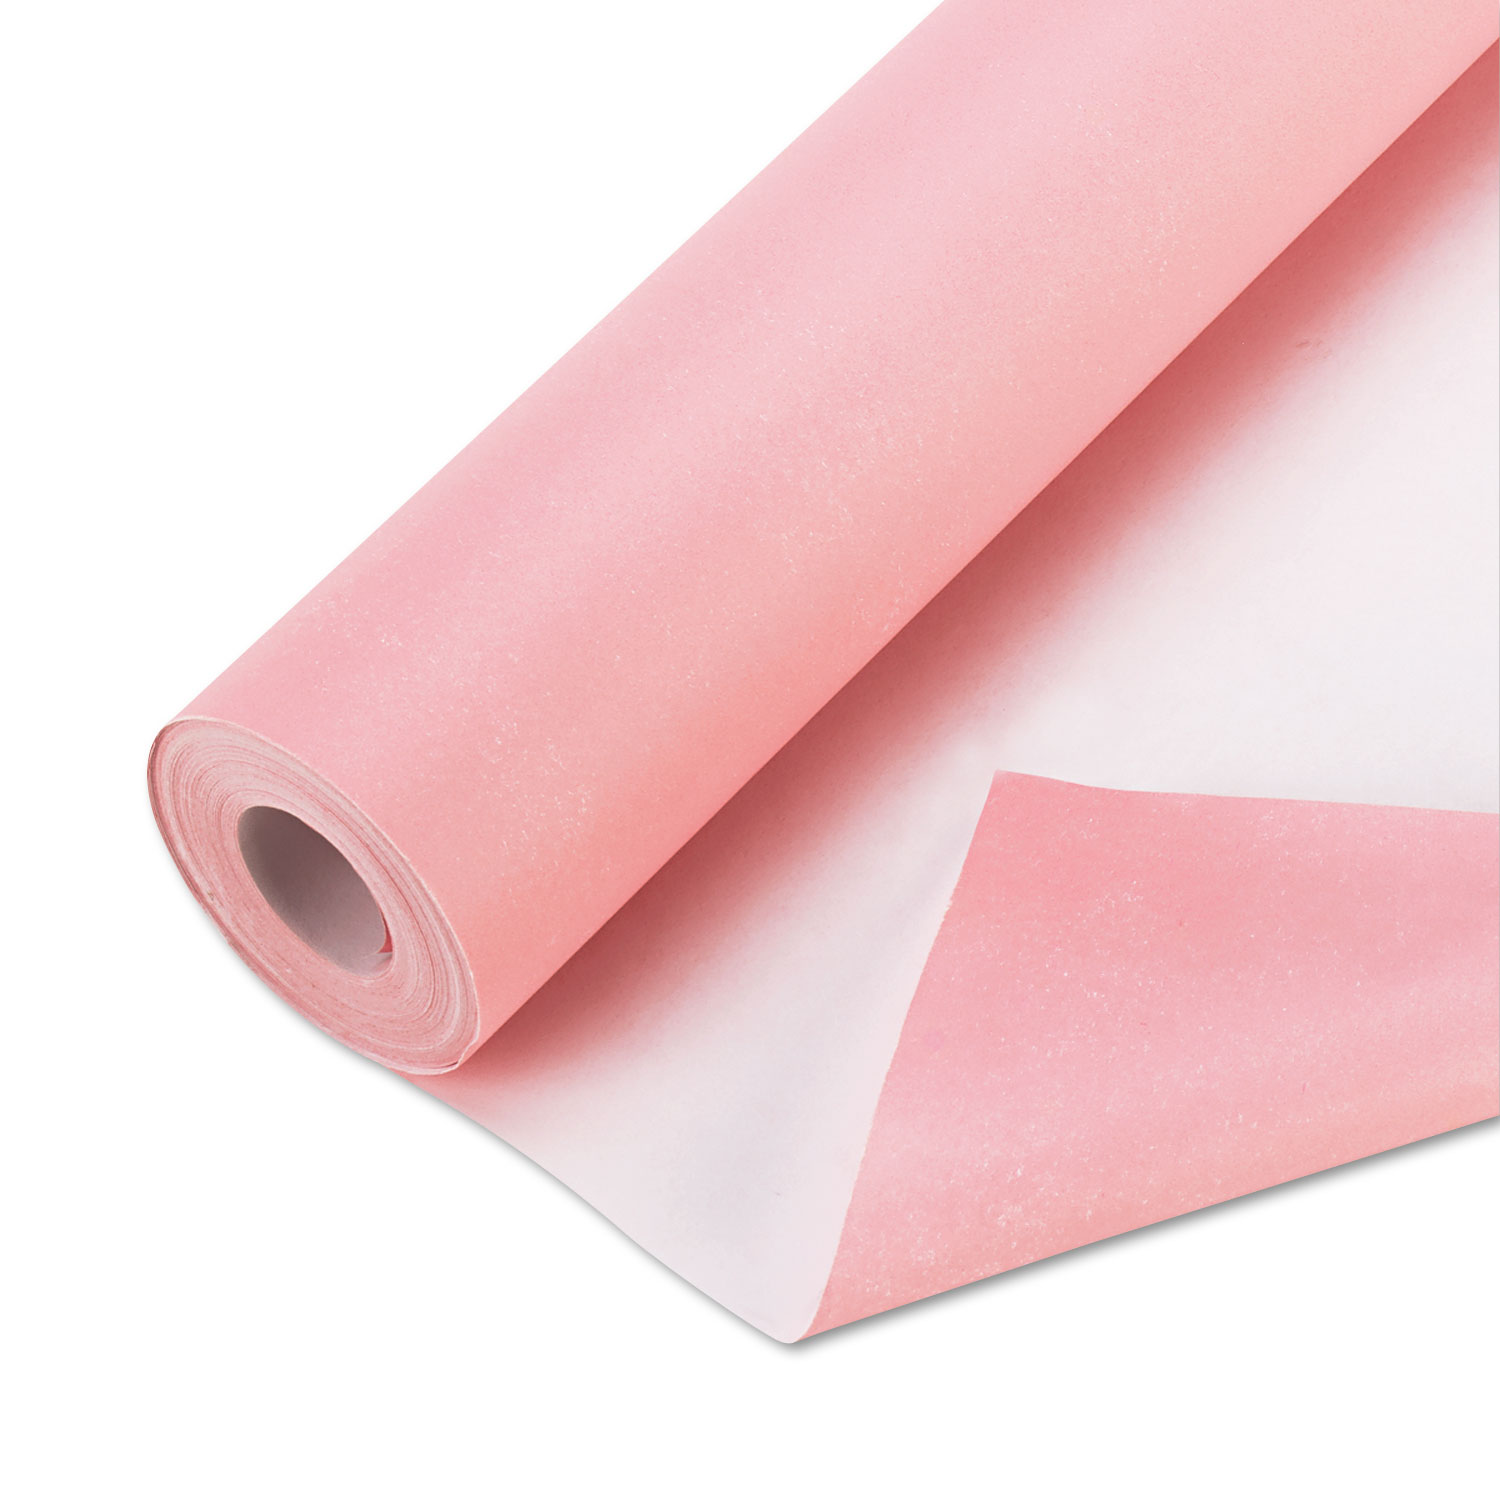  Pacon 57265 Fadeless Paper Roll, 50lb, 48 x 50ft, Pink (PAC57265) 